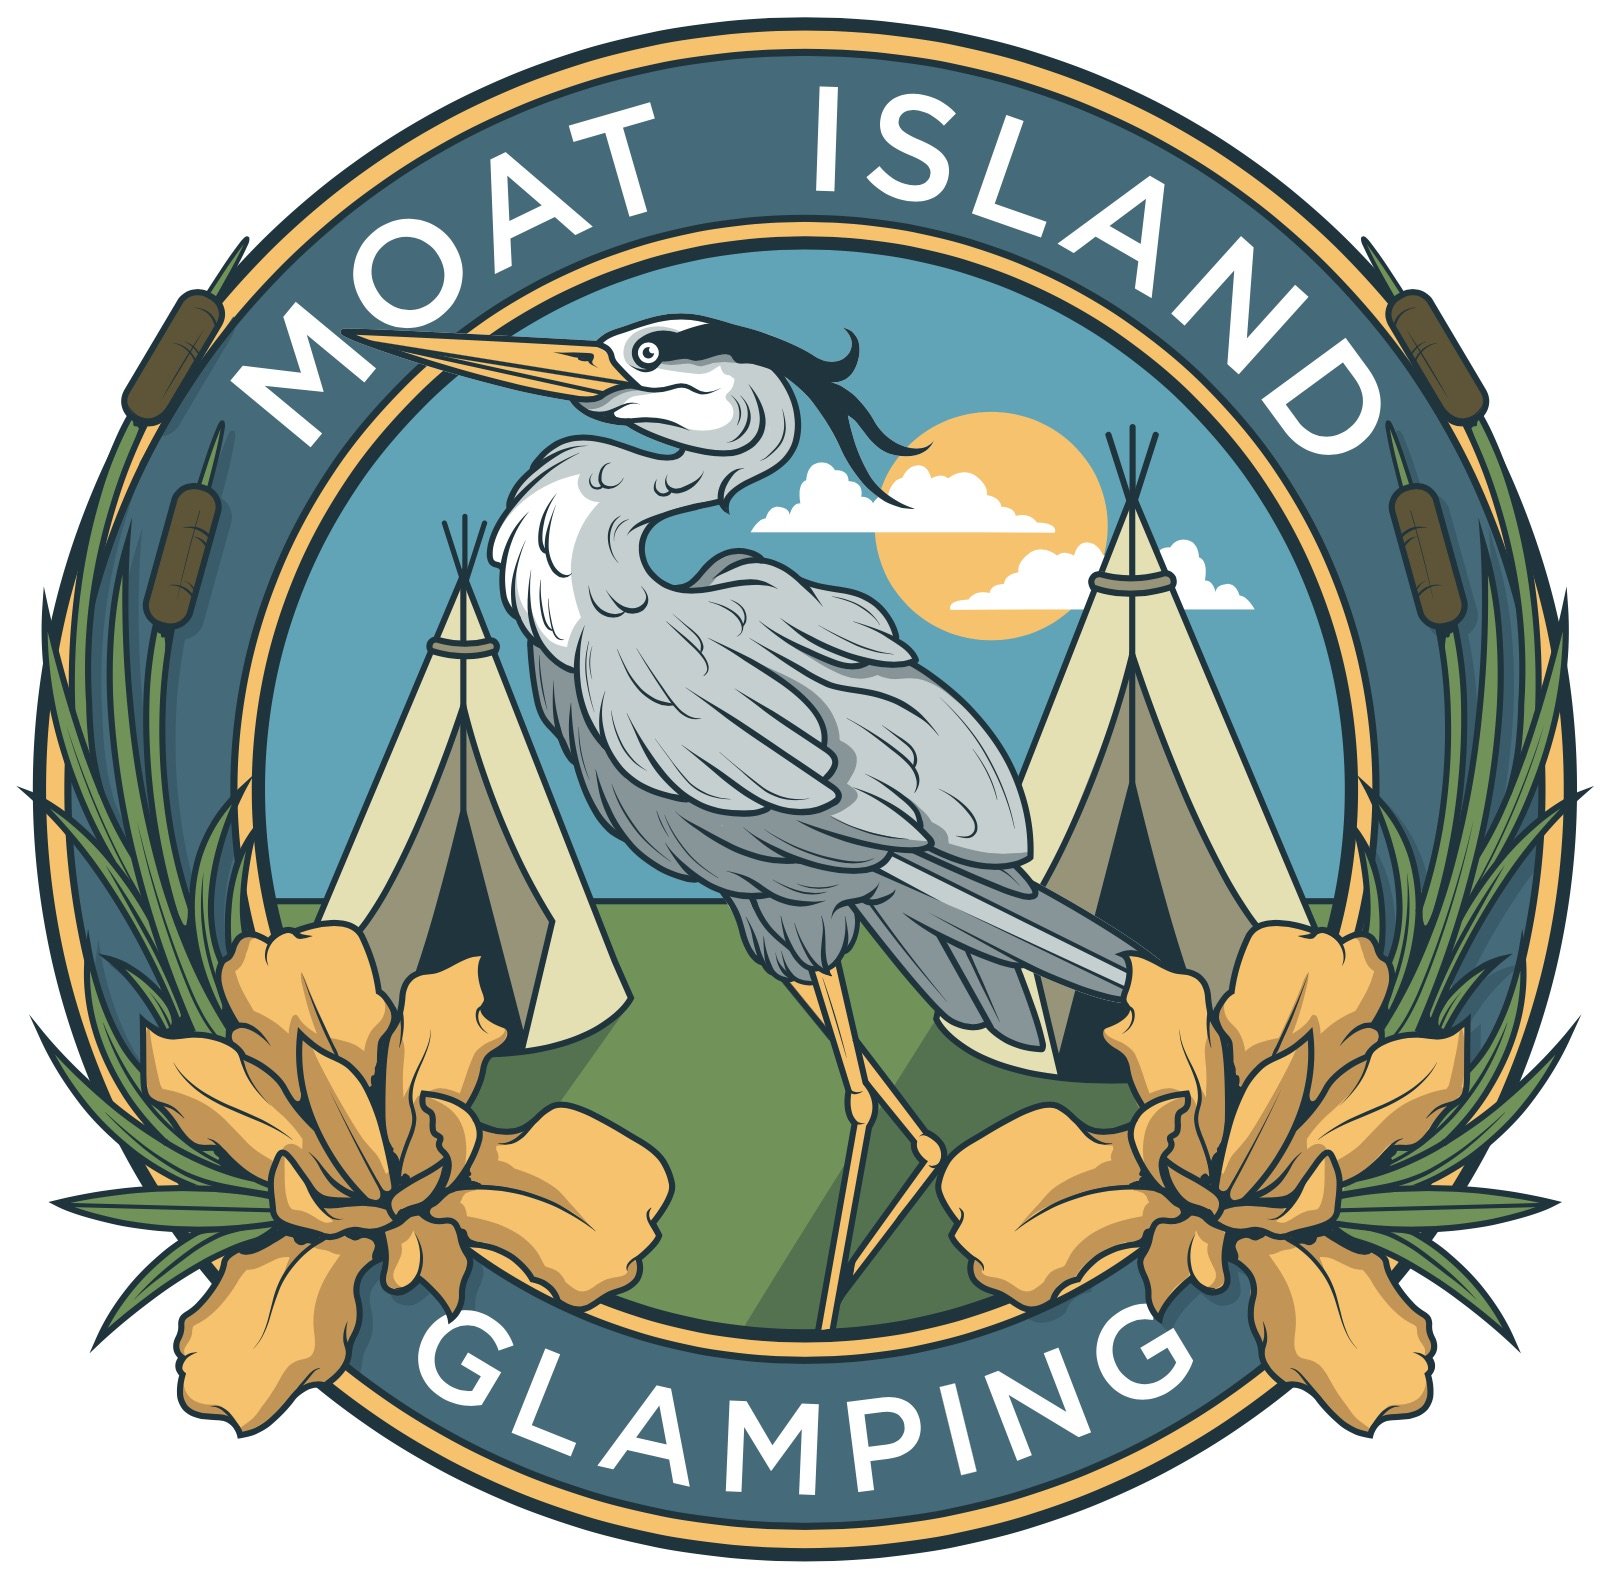 Moat Island Glamping 